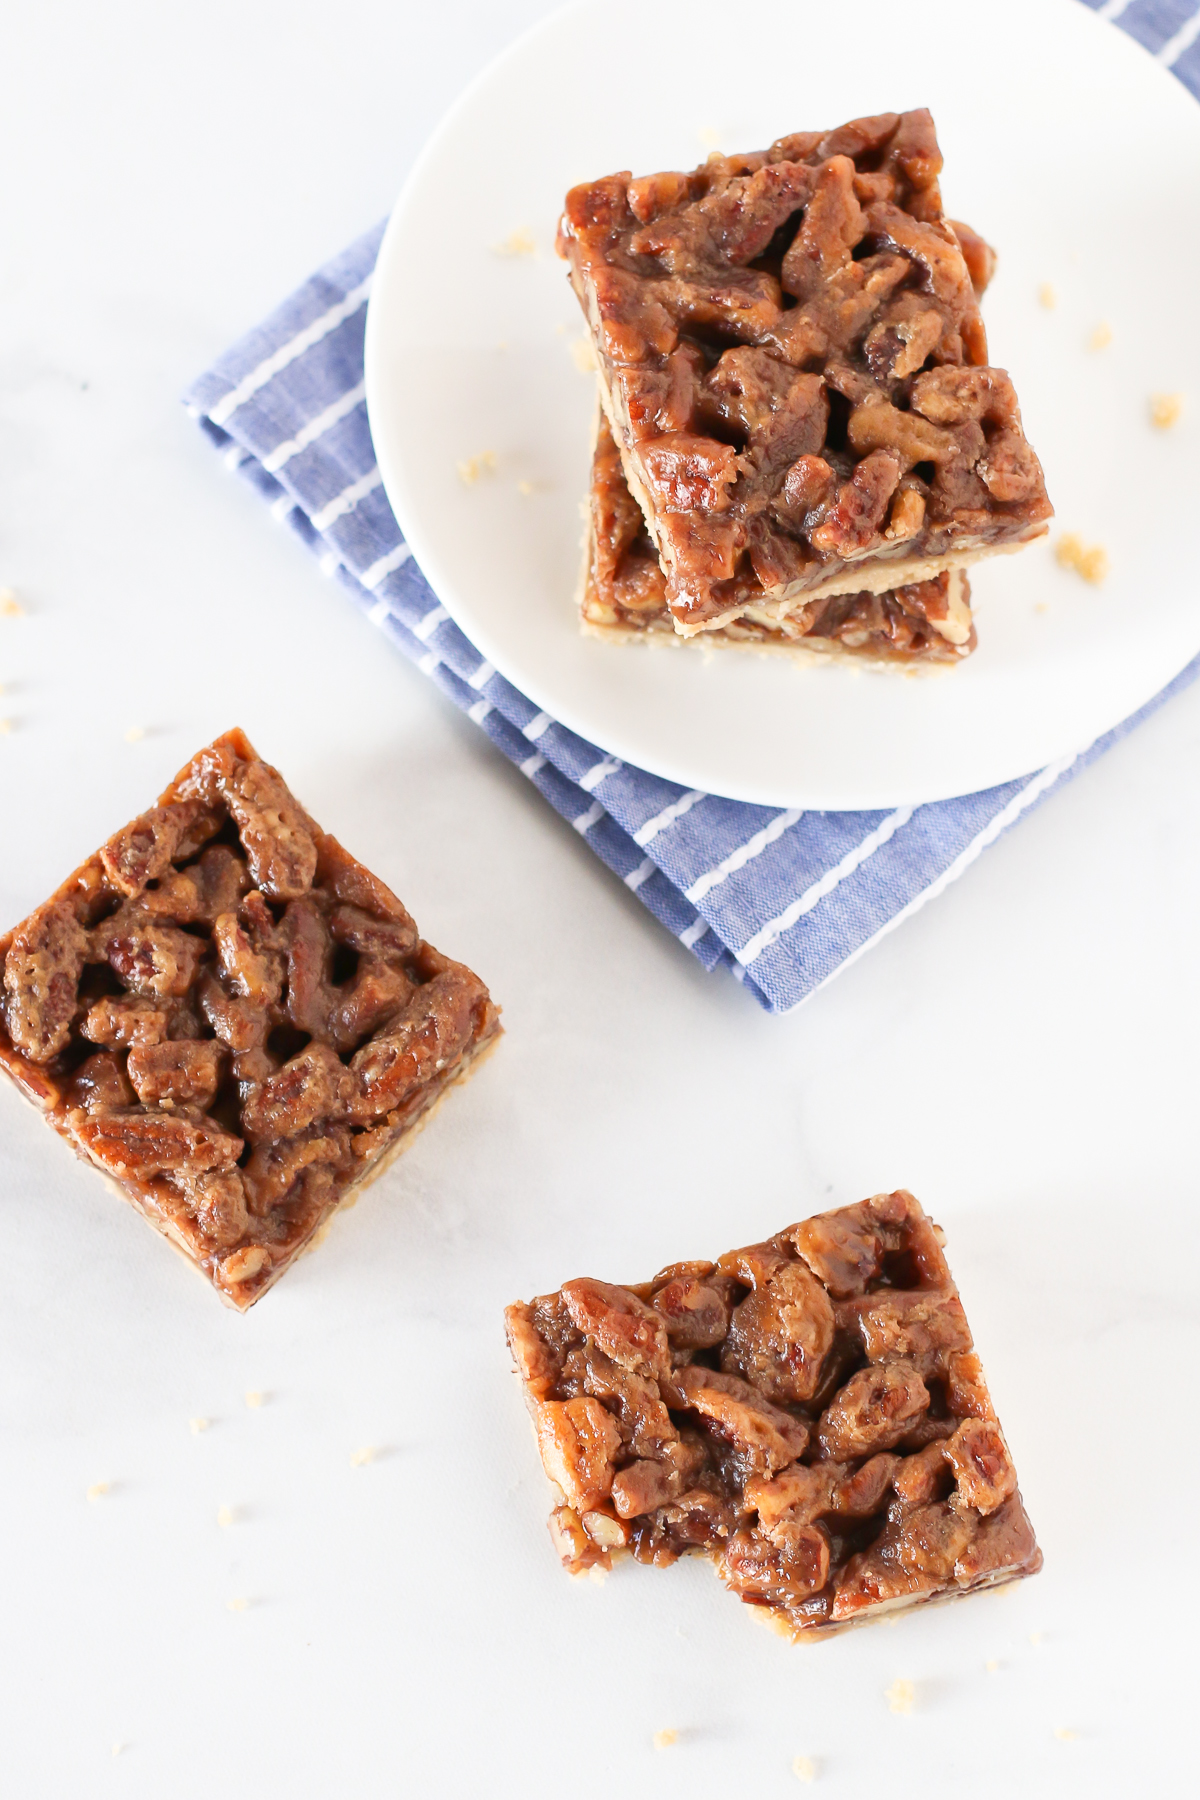 Gluten Free Vegan Pecan Pie Pies. For all of you pecan pie lovers, these decadent bars are JUST for you!